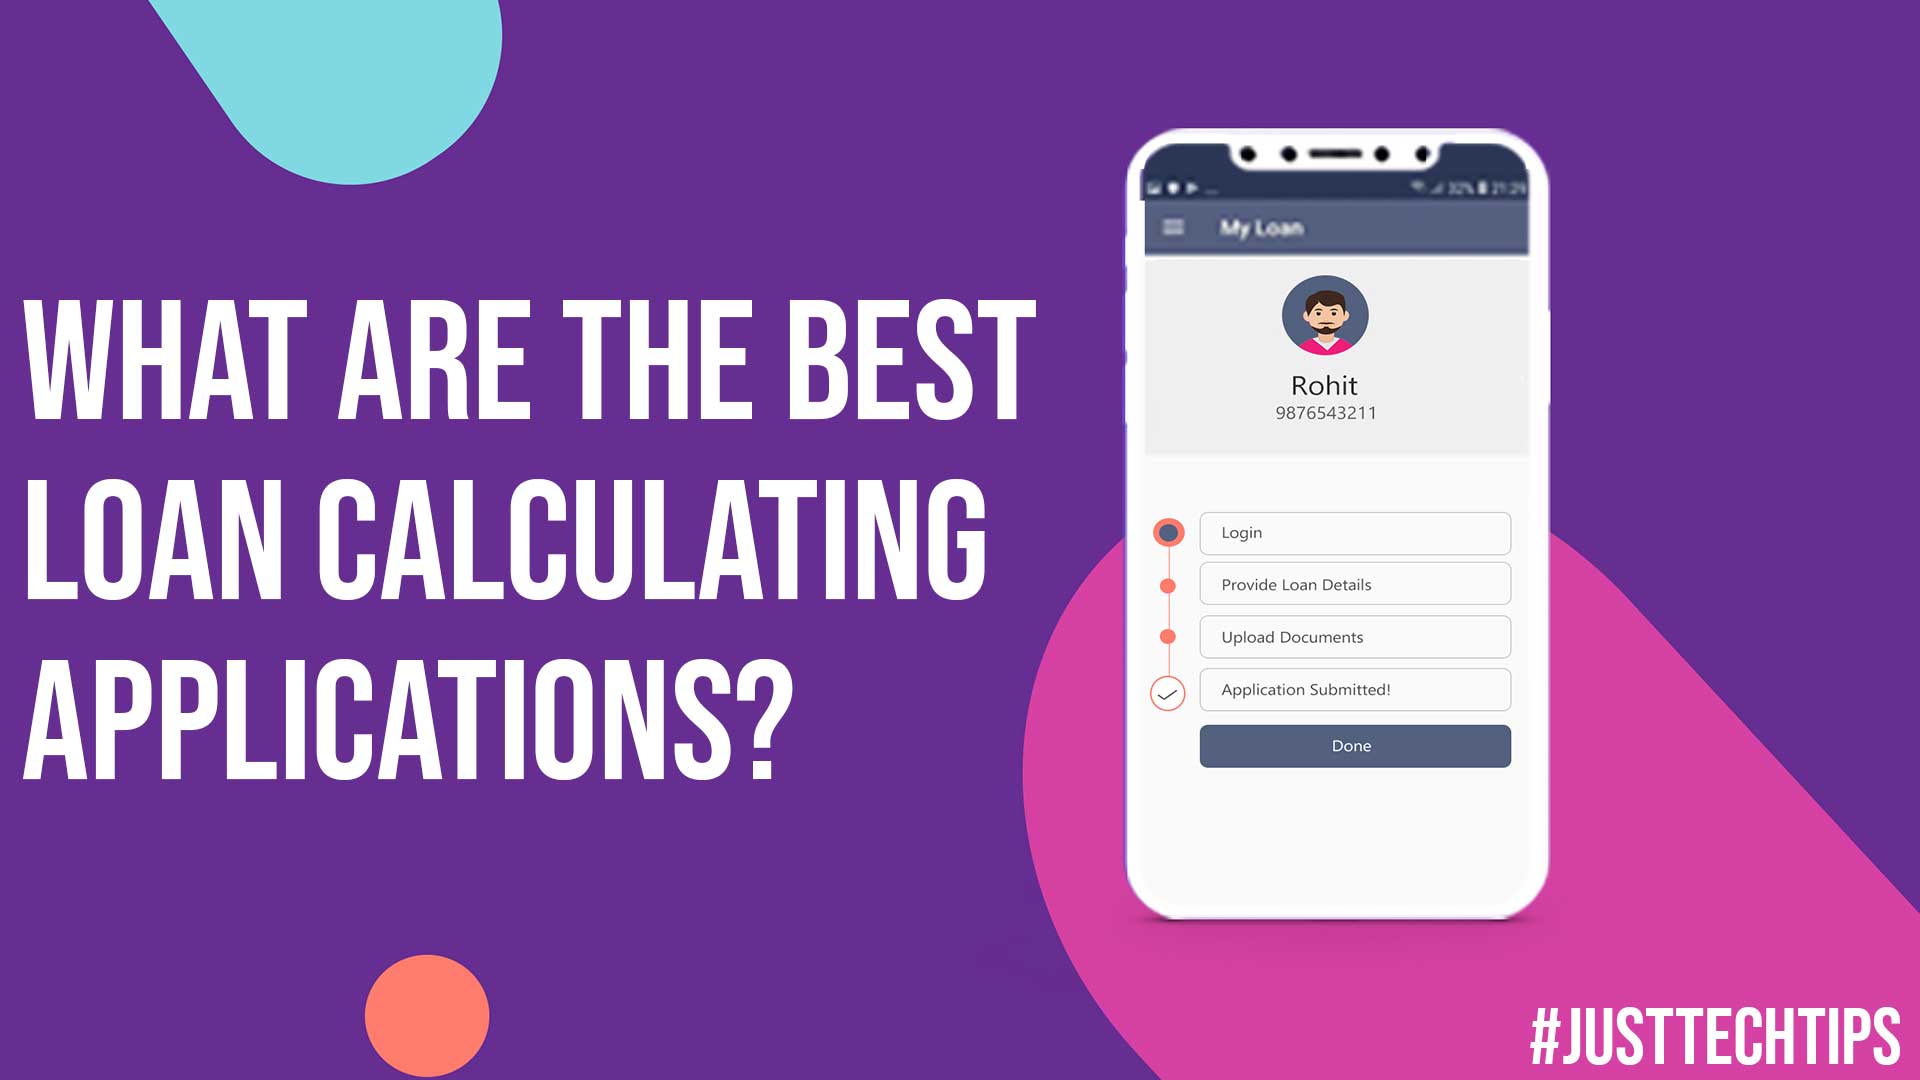 What Are The Best Loan Calculating Applications